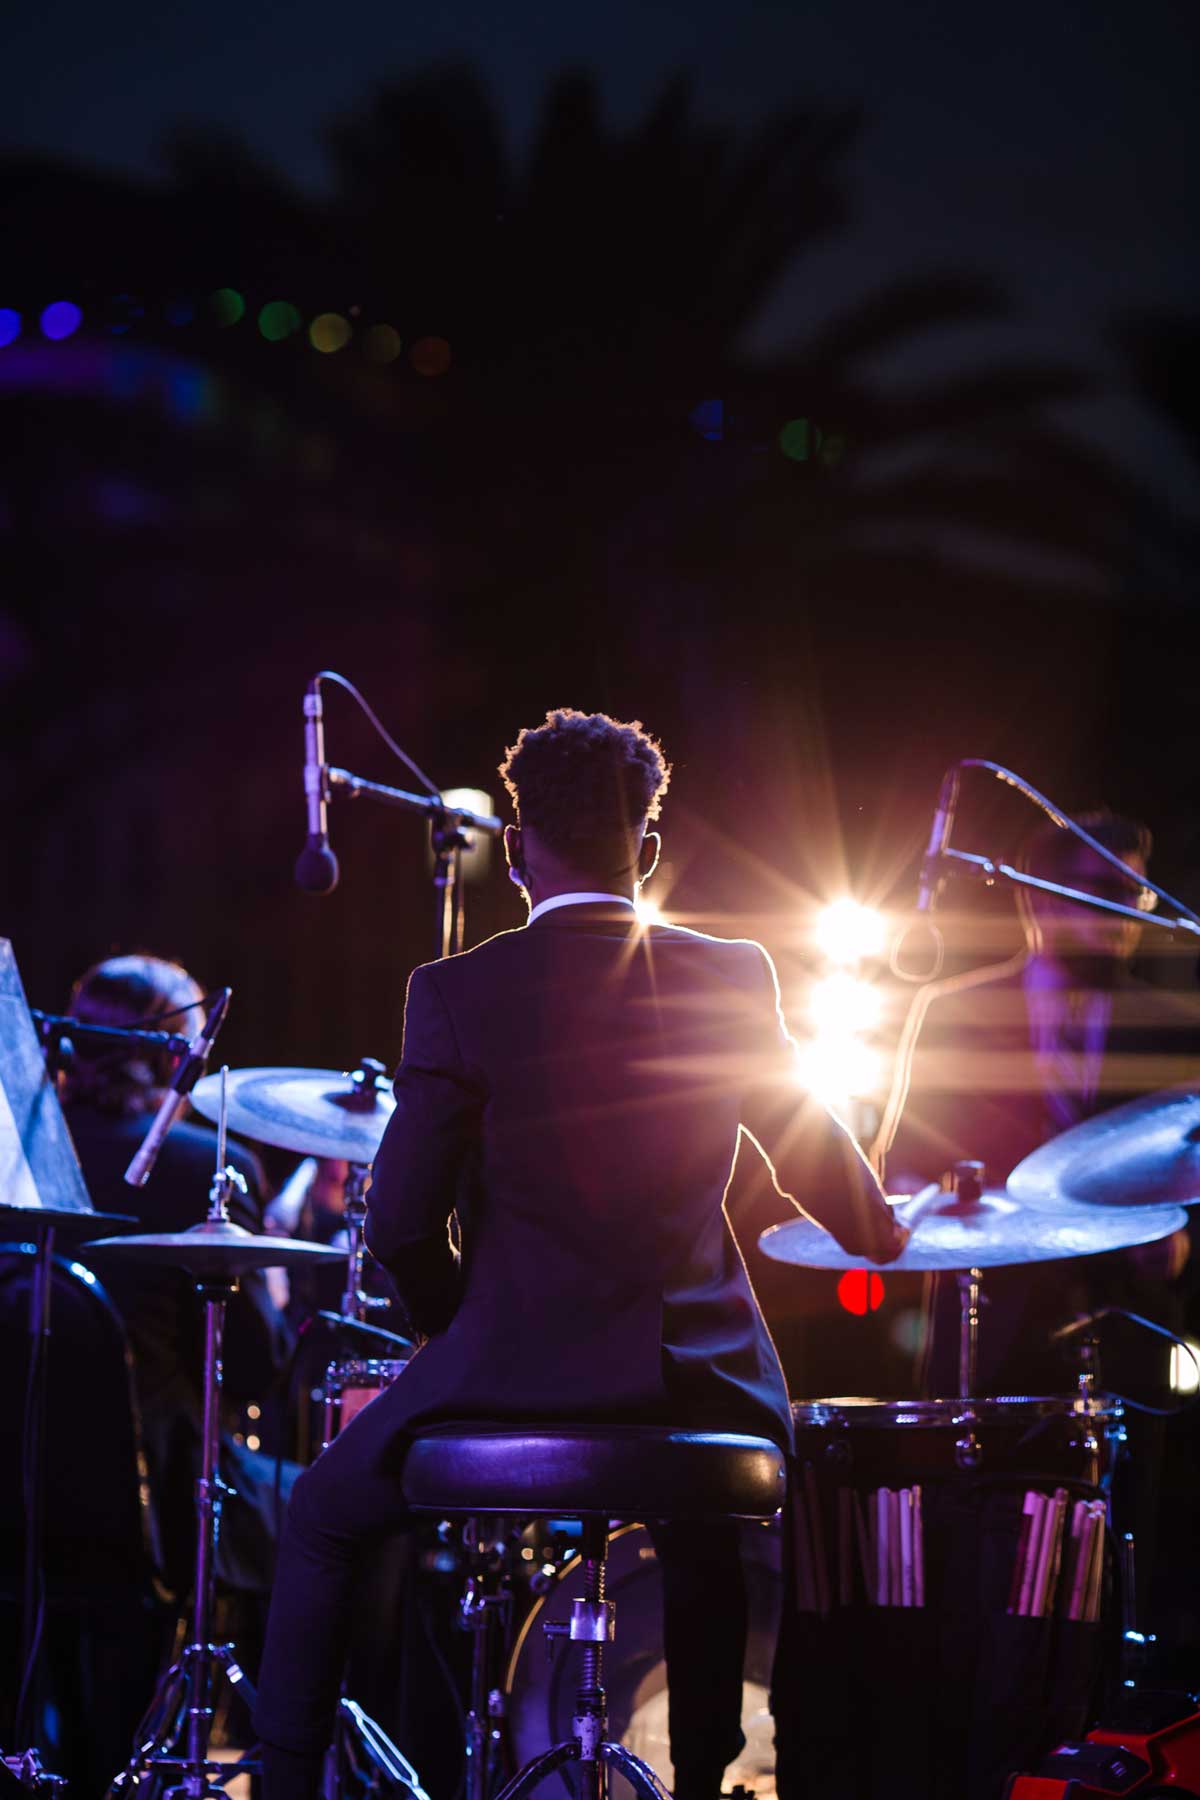 Photo of student seated at drums on stage at night, view from behind